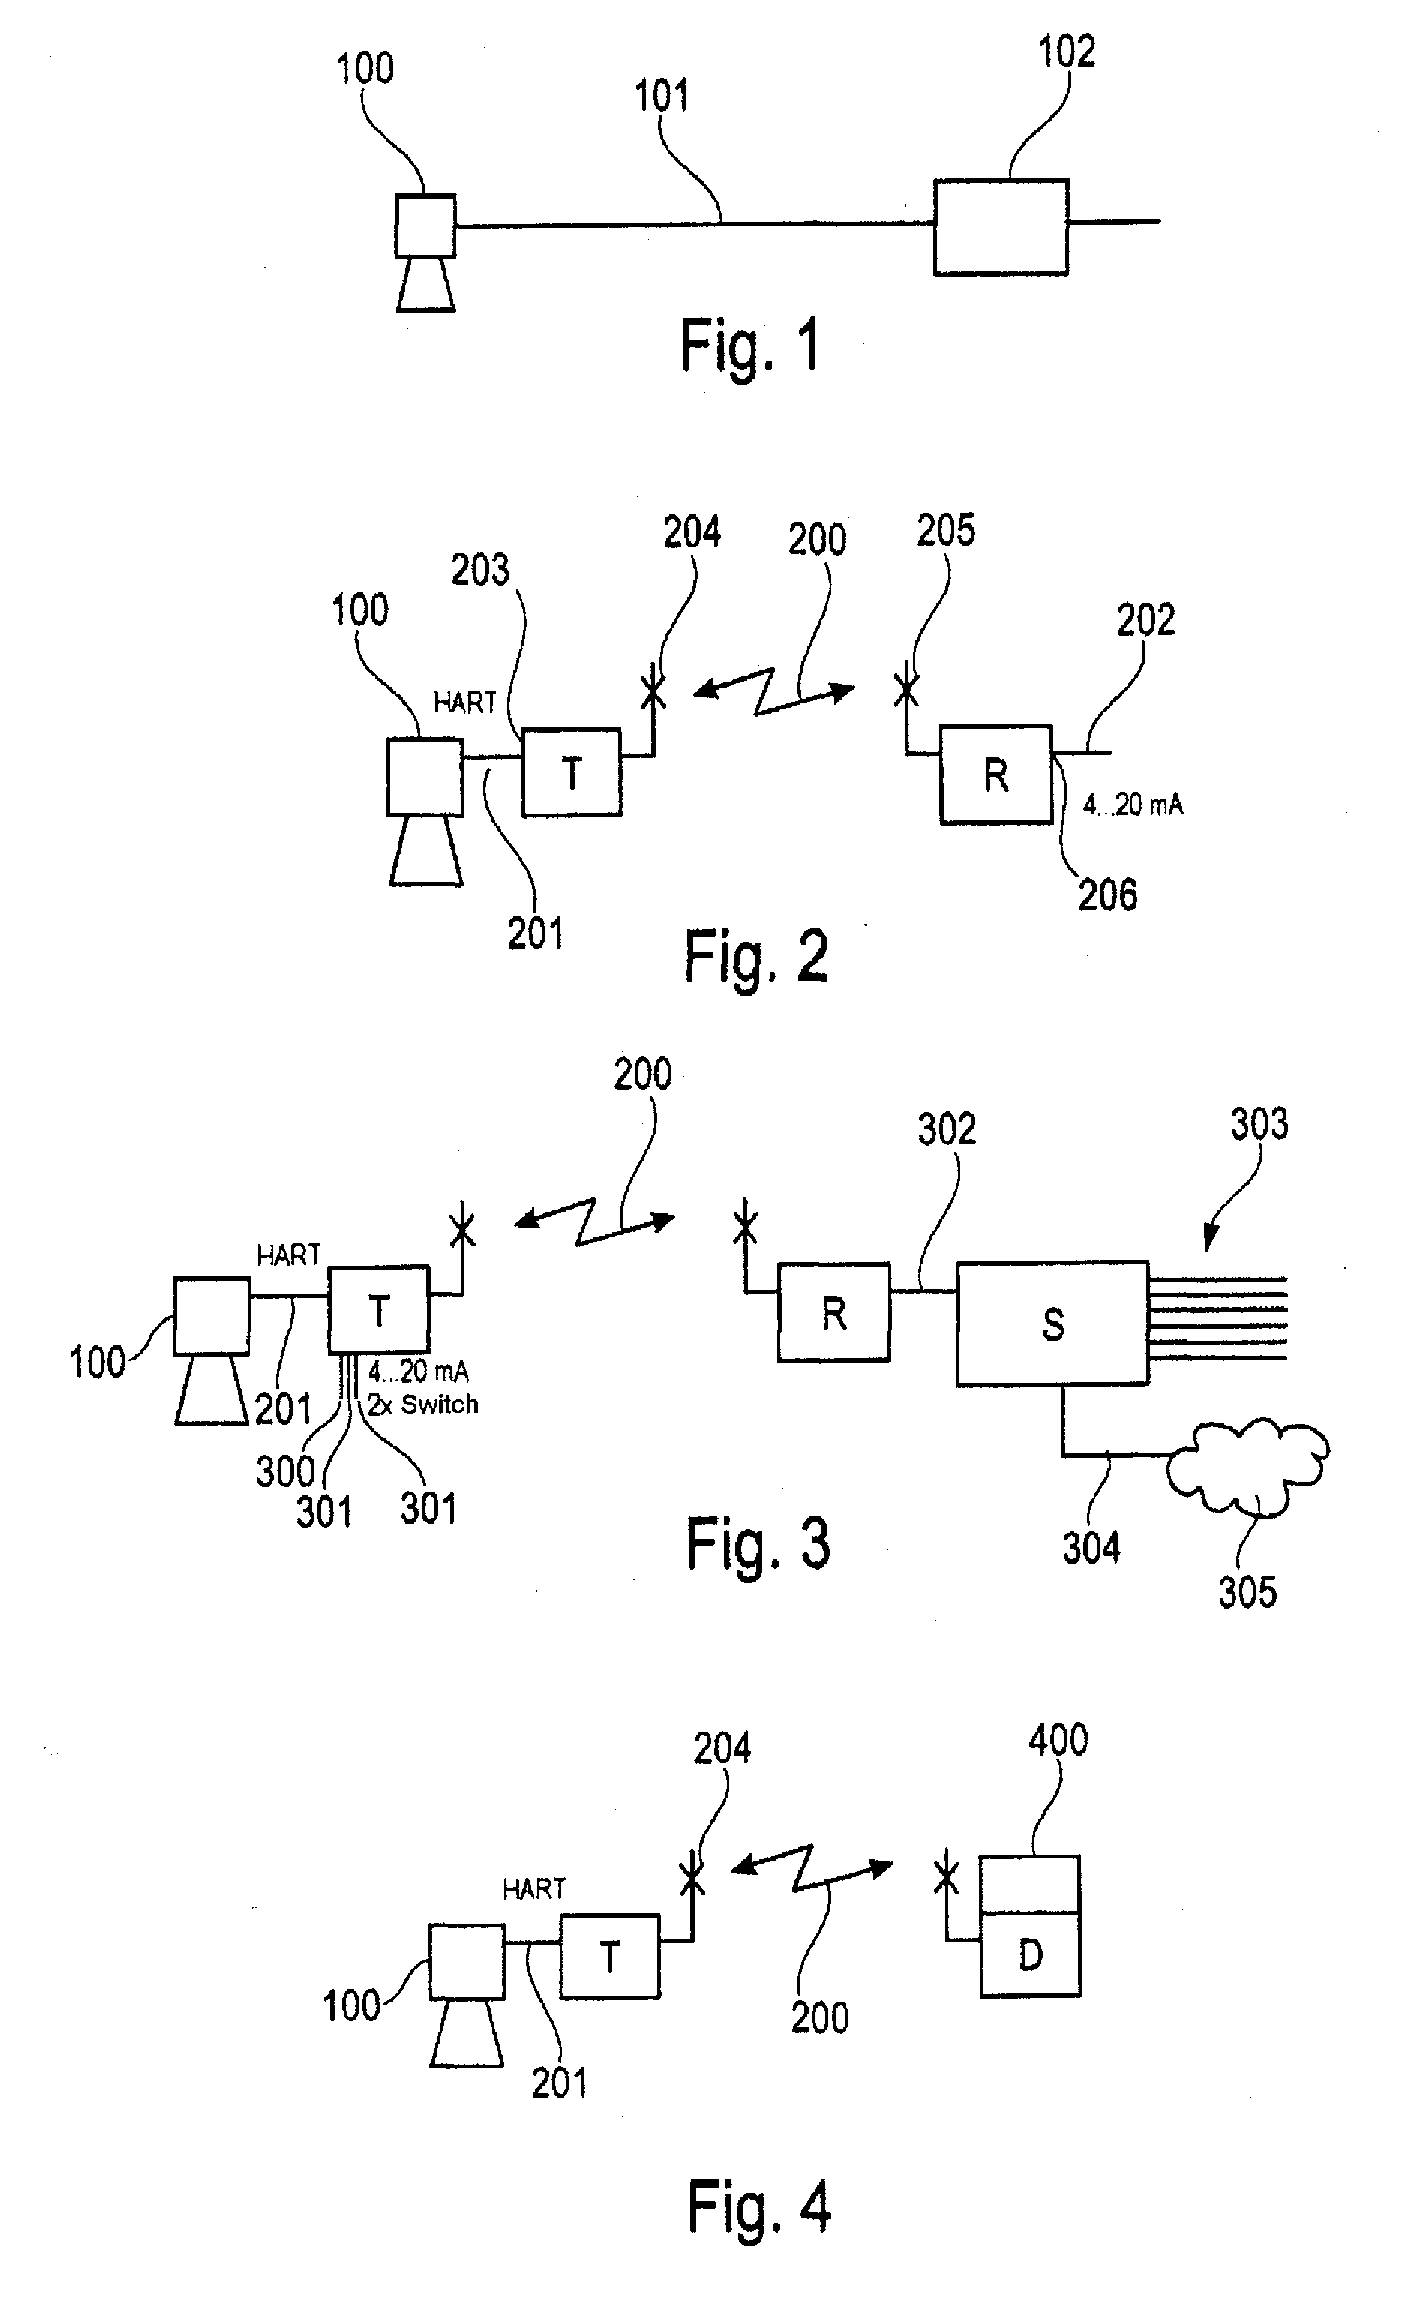 Transceiver for Wireless Transmission of Field Device Signals